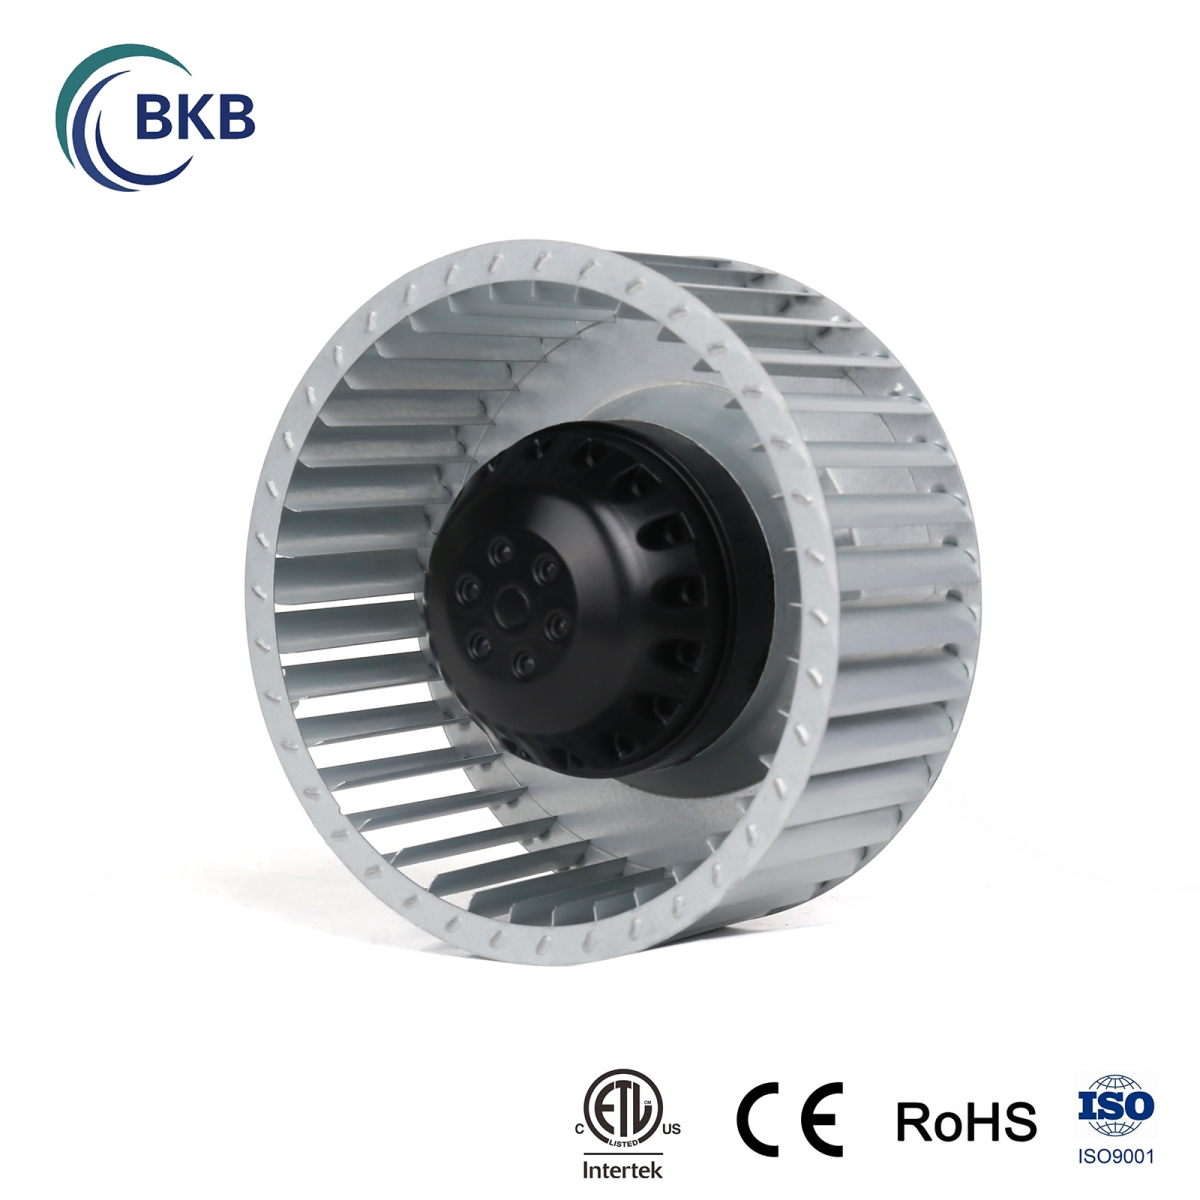 the Asia Pacific region accounted for the largest market share in 2018.-SUNLIGHT BLOWER,Centrifugal Fans, Inline Fans,Motors,Backward curved centrifugal fans ,Forward curved centrifugal fans ,inlet fans, EC fans